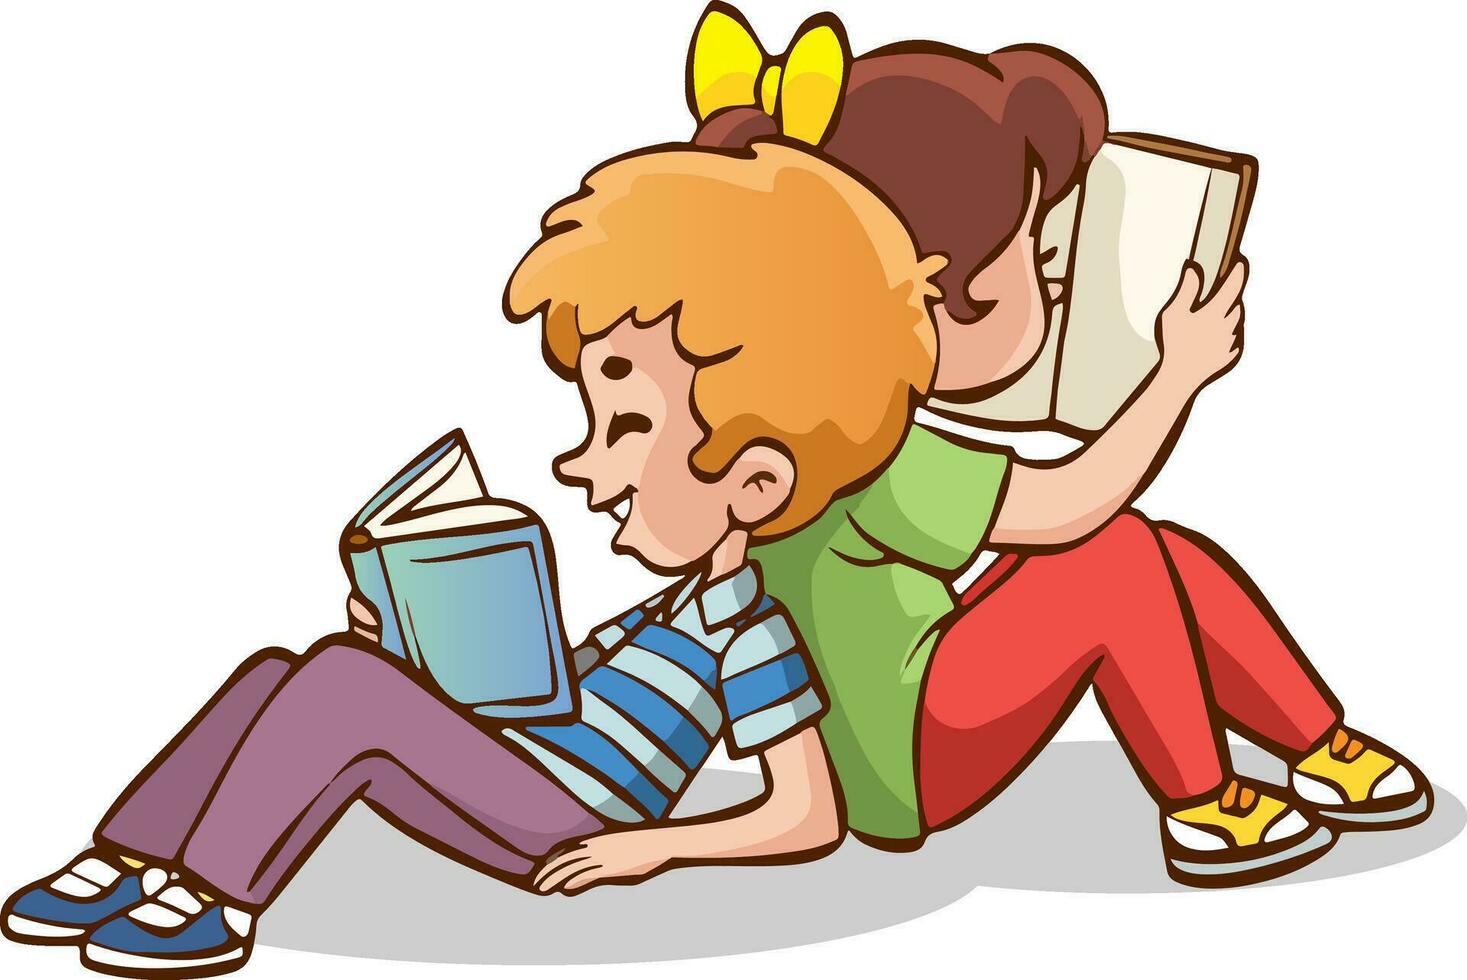 Cute little boy and girl sitting reading book on floor for learning. clever kid. childhood happy smile when reading textbook. character cartoon child vector illustration for education and study.